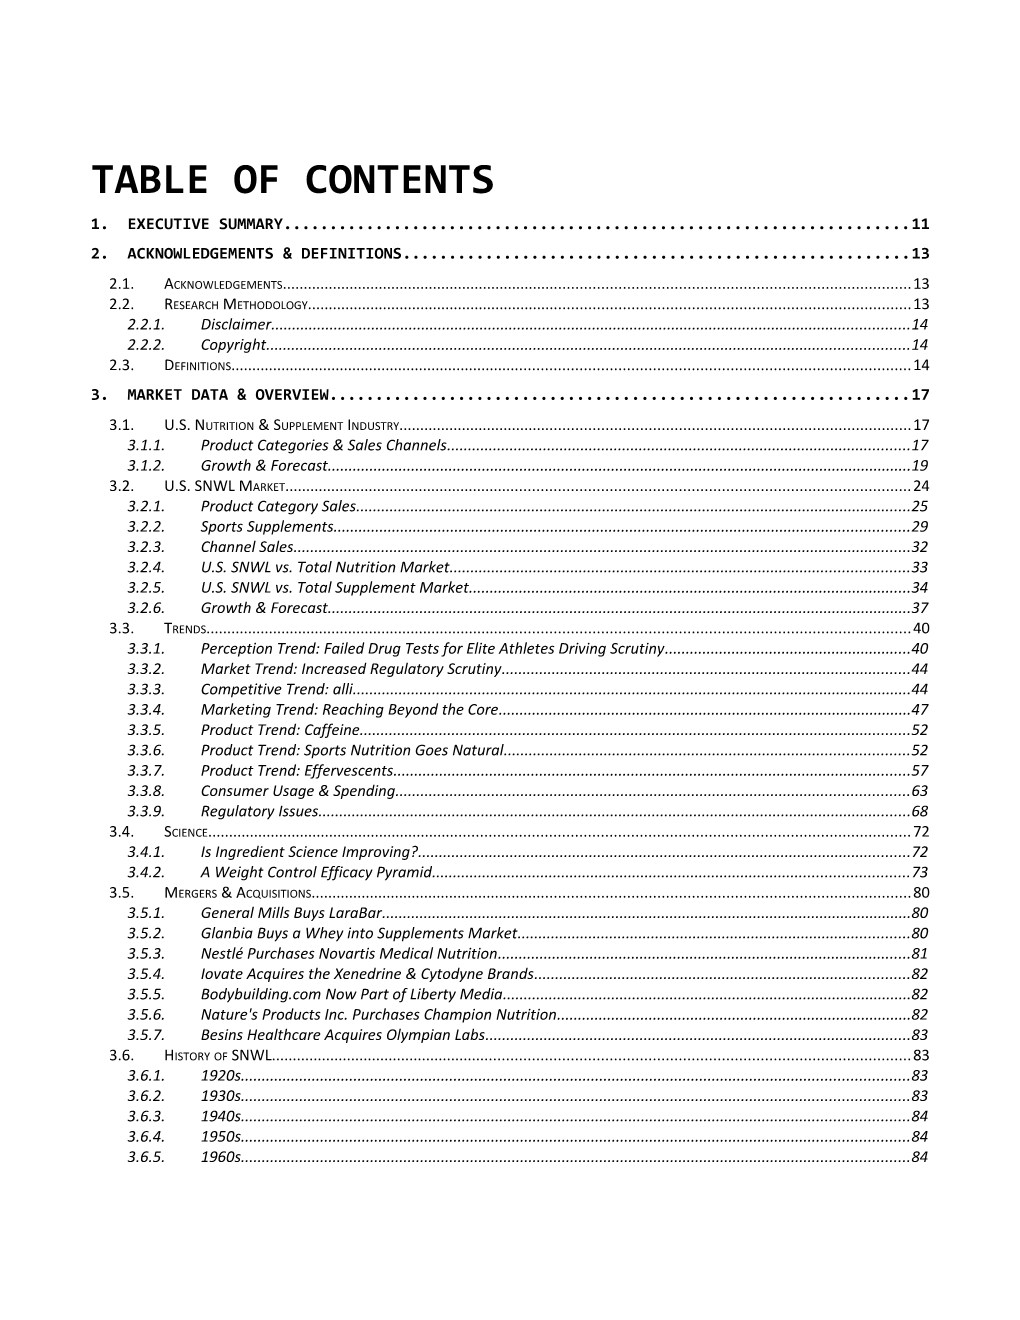 Table of Contents s302